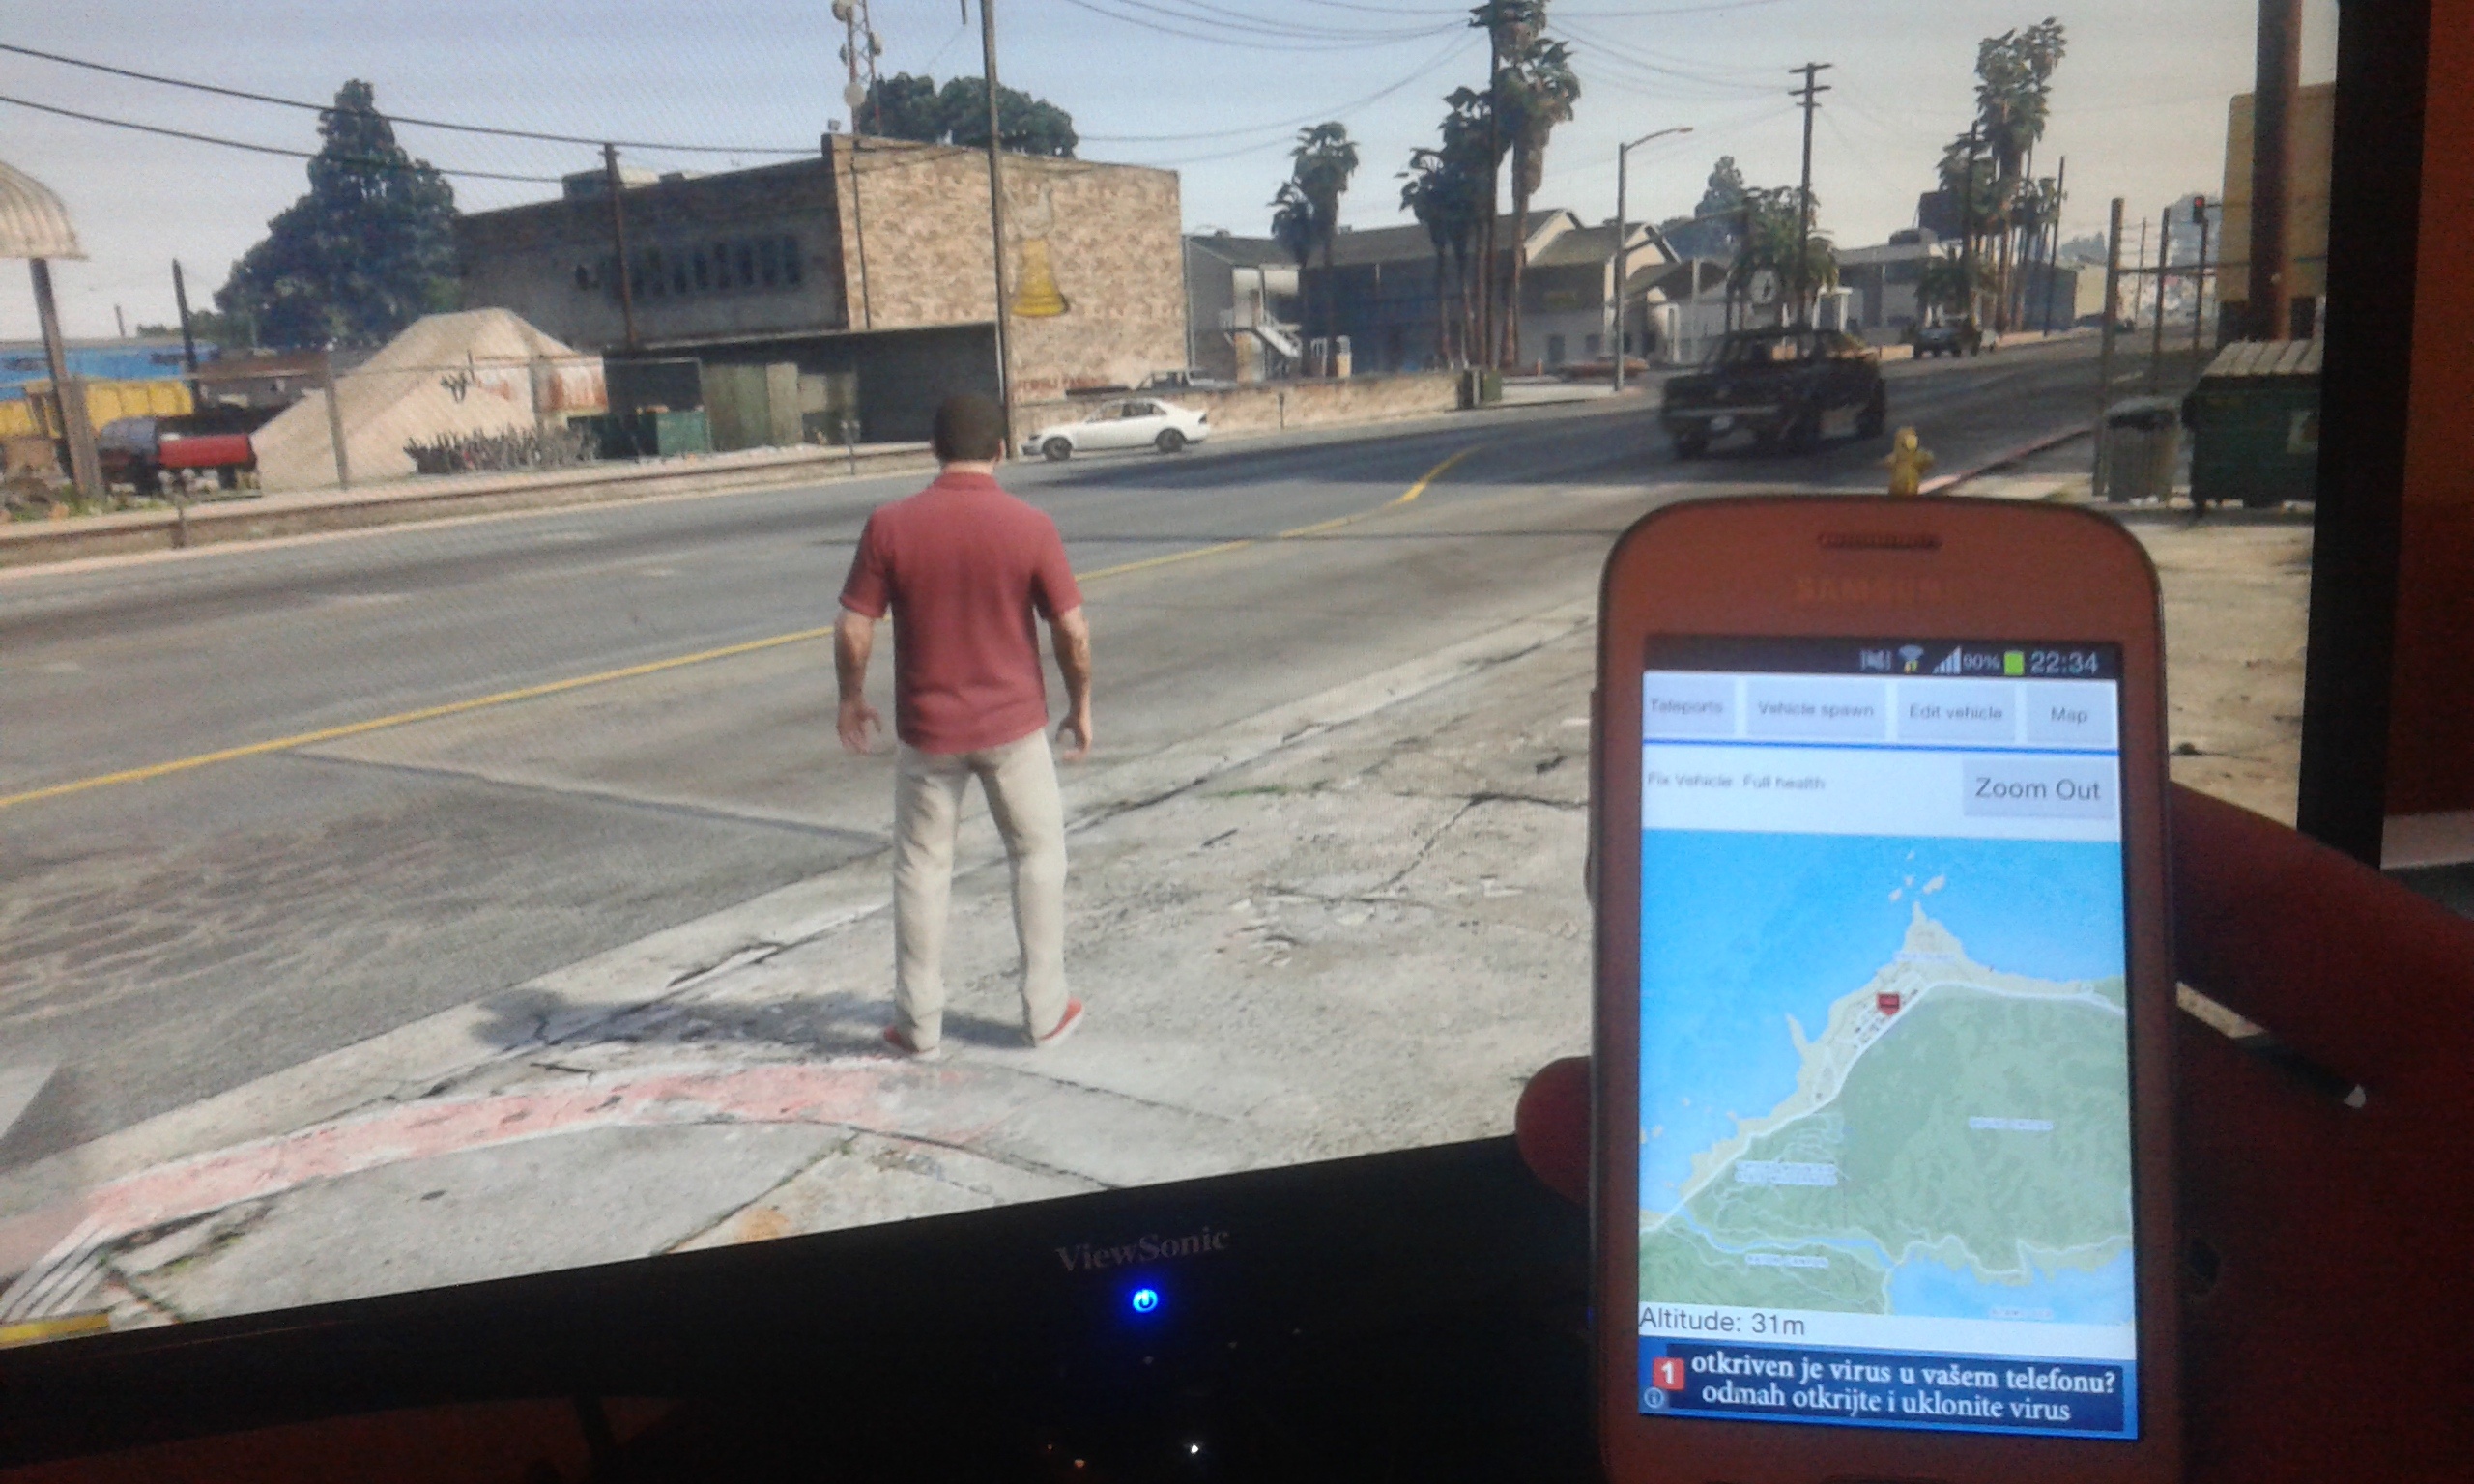 Gta 5 Mods For Android - bopqefantastic